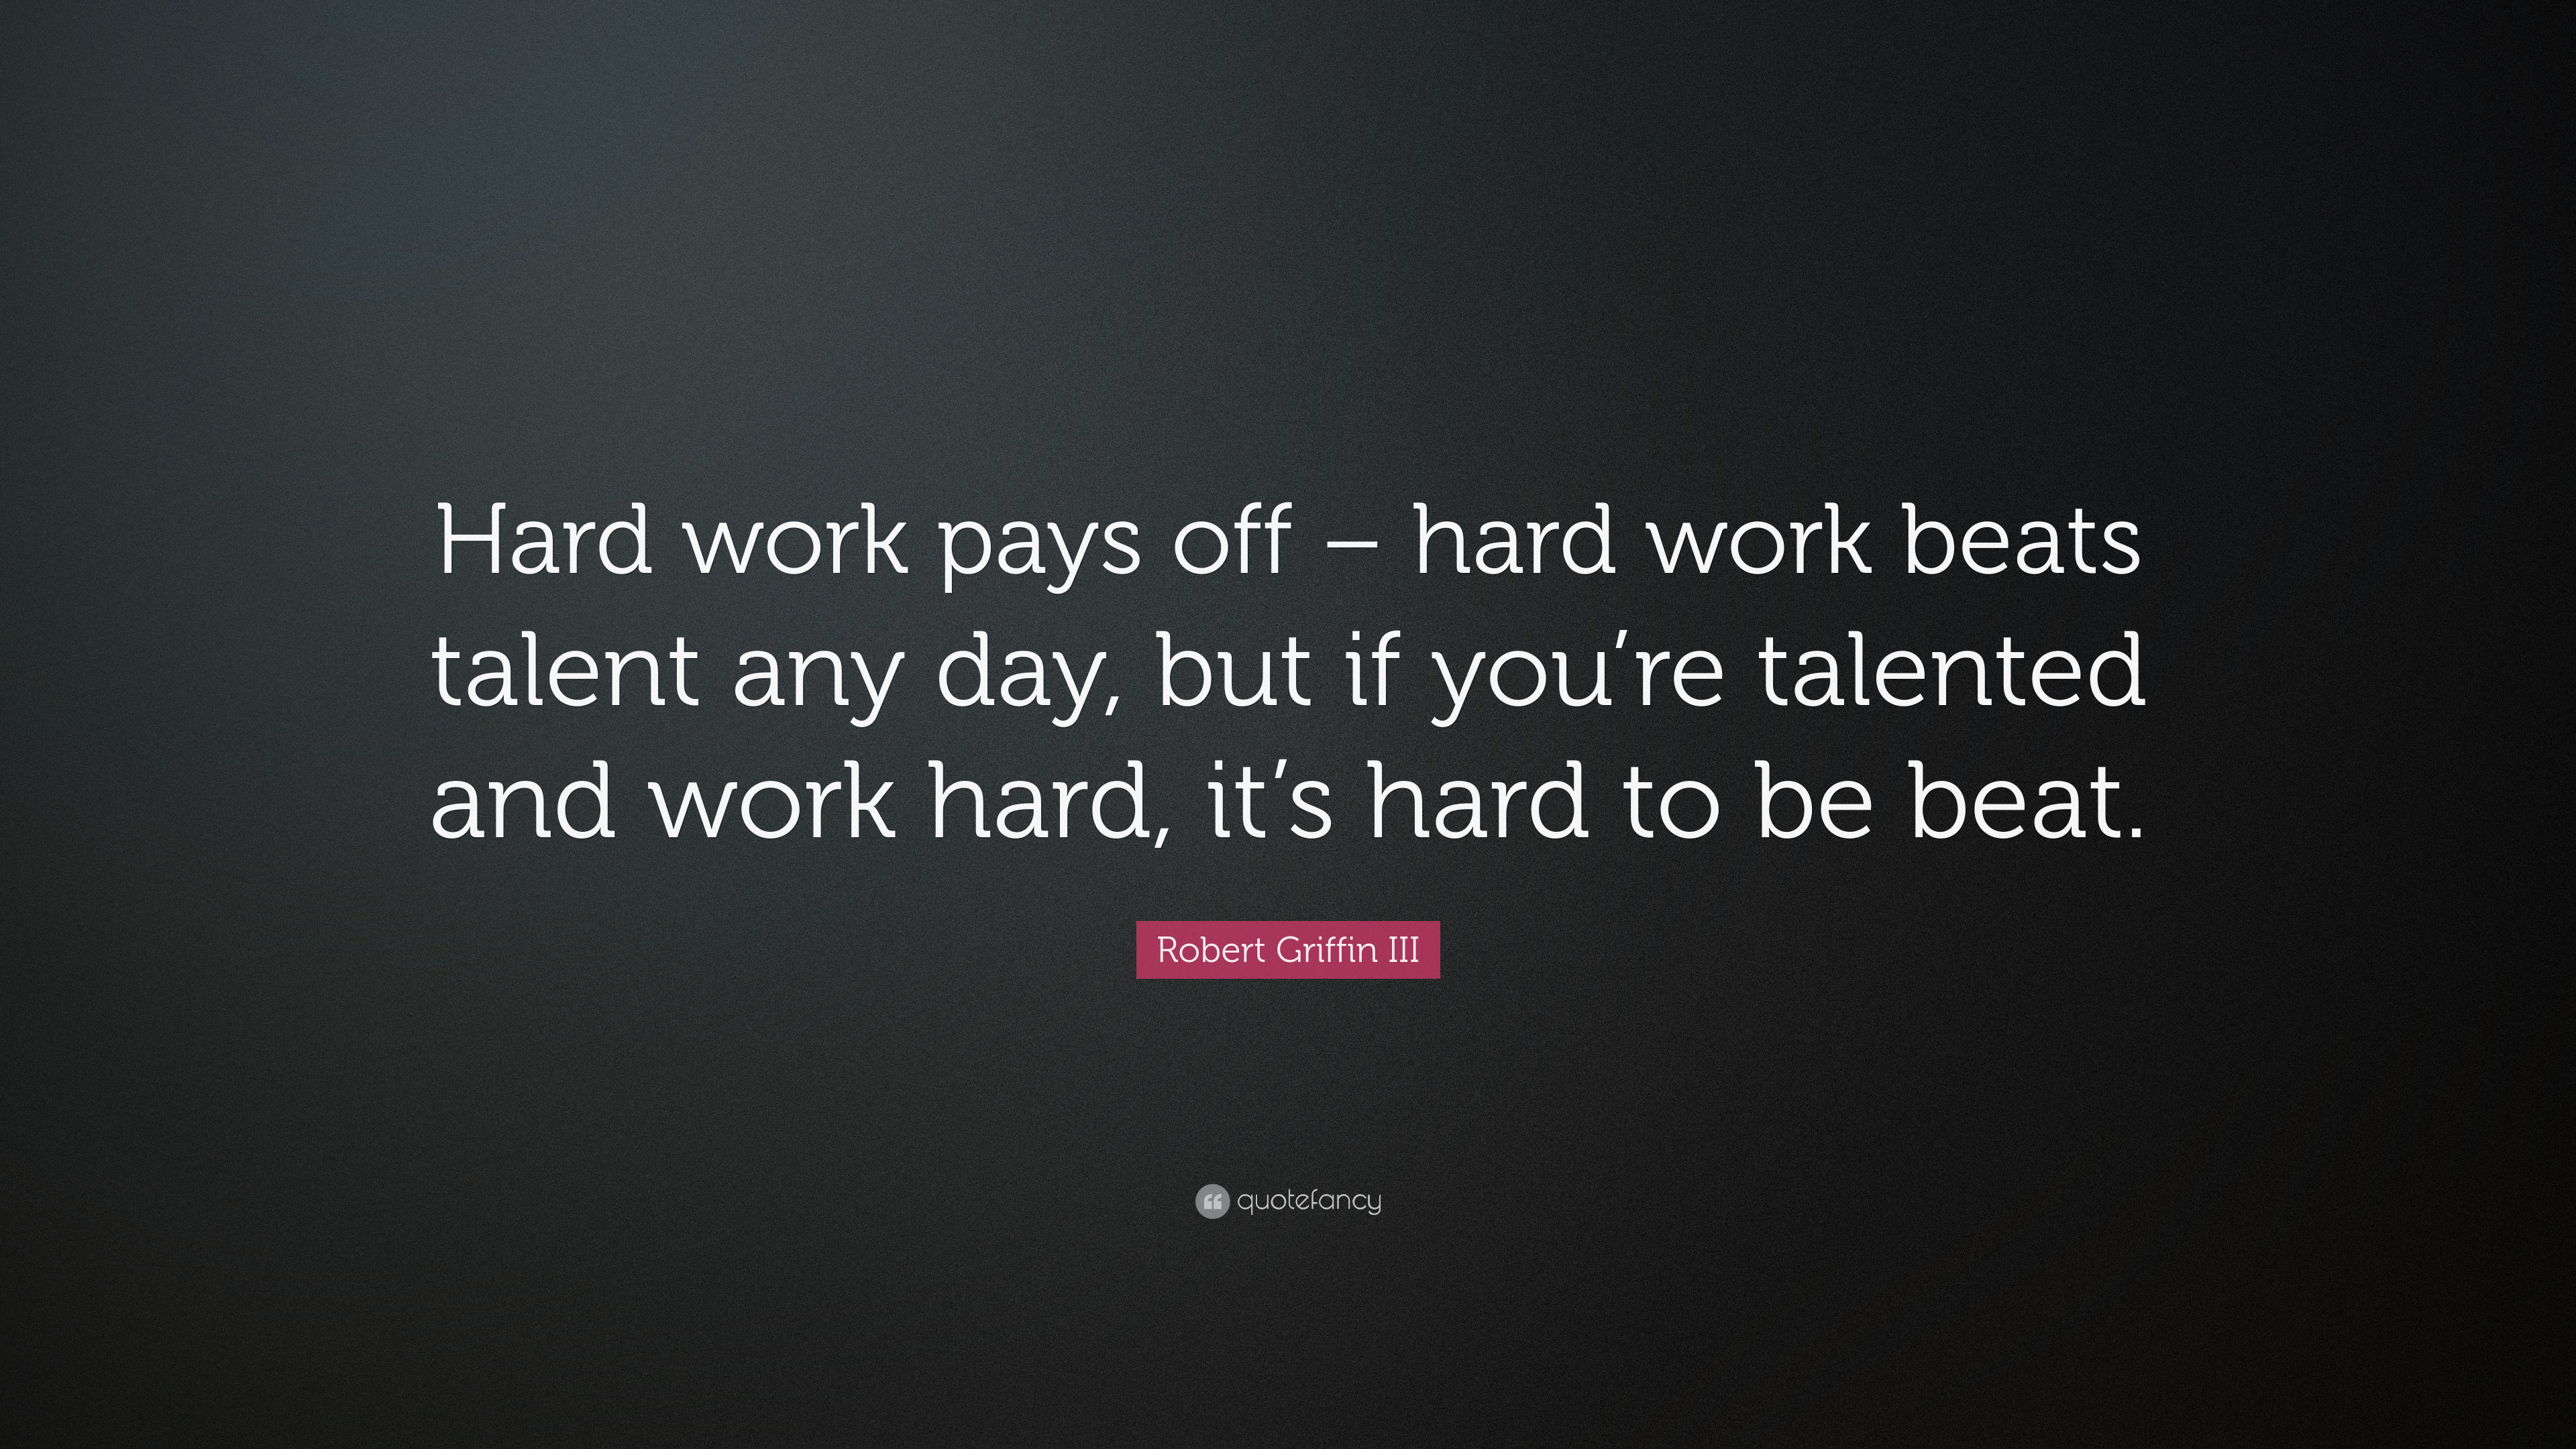 Robert Griffin III Quote: “Hard work pays off